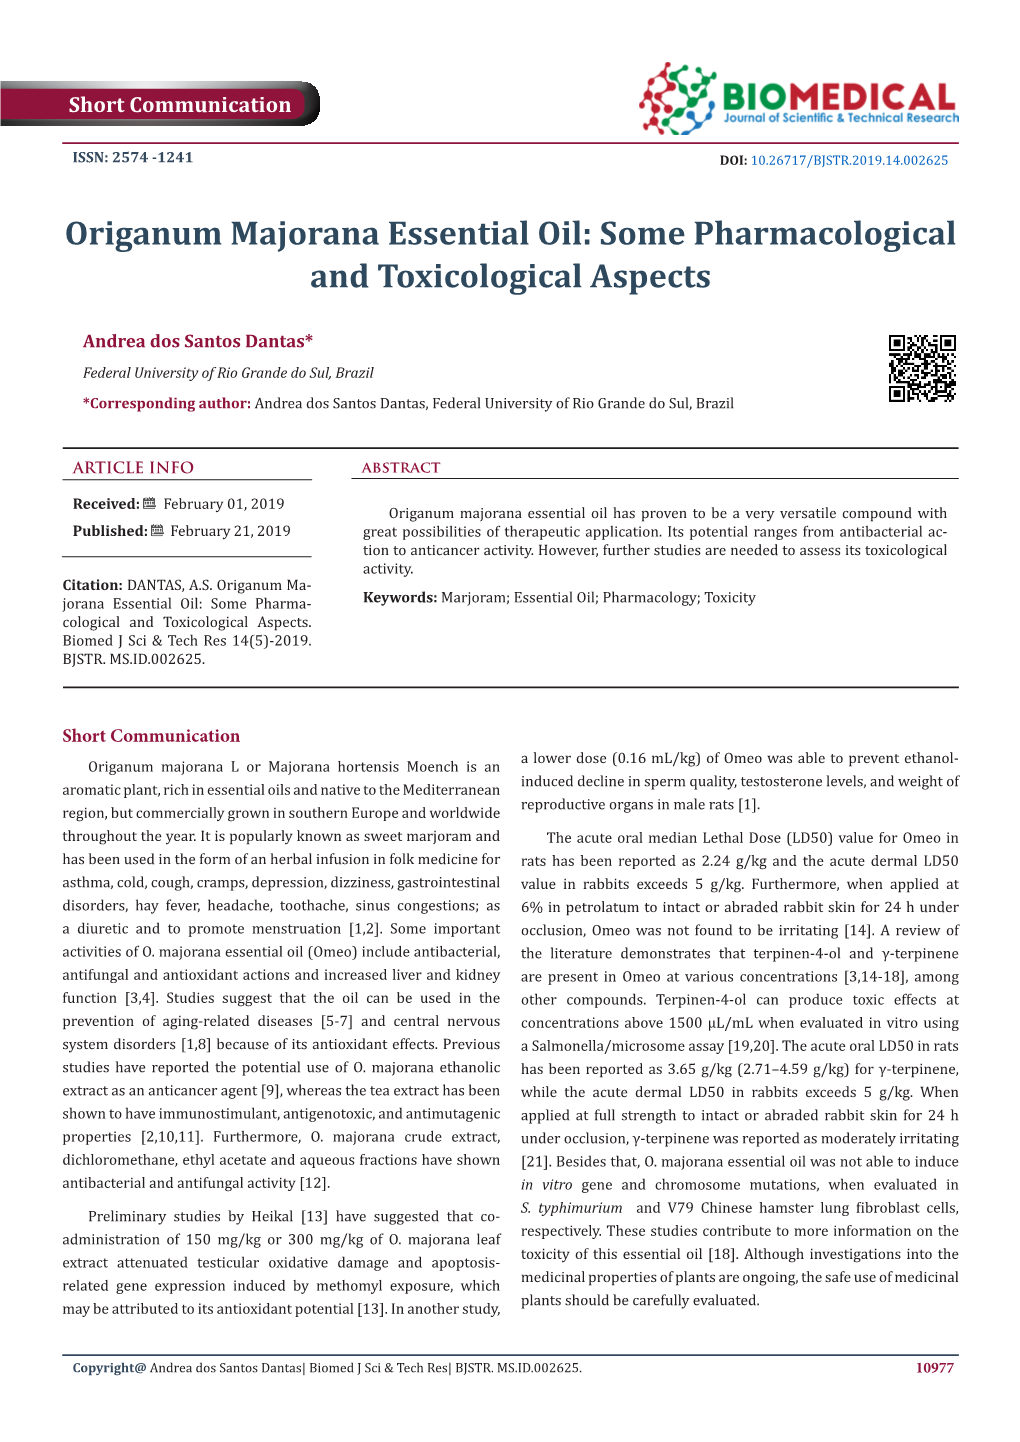 Origanum Majorana Essential Oil: Some Pharmacological and Toxicological Aspects